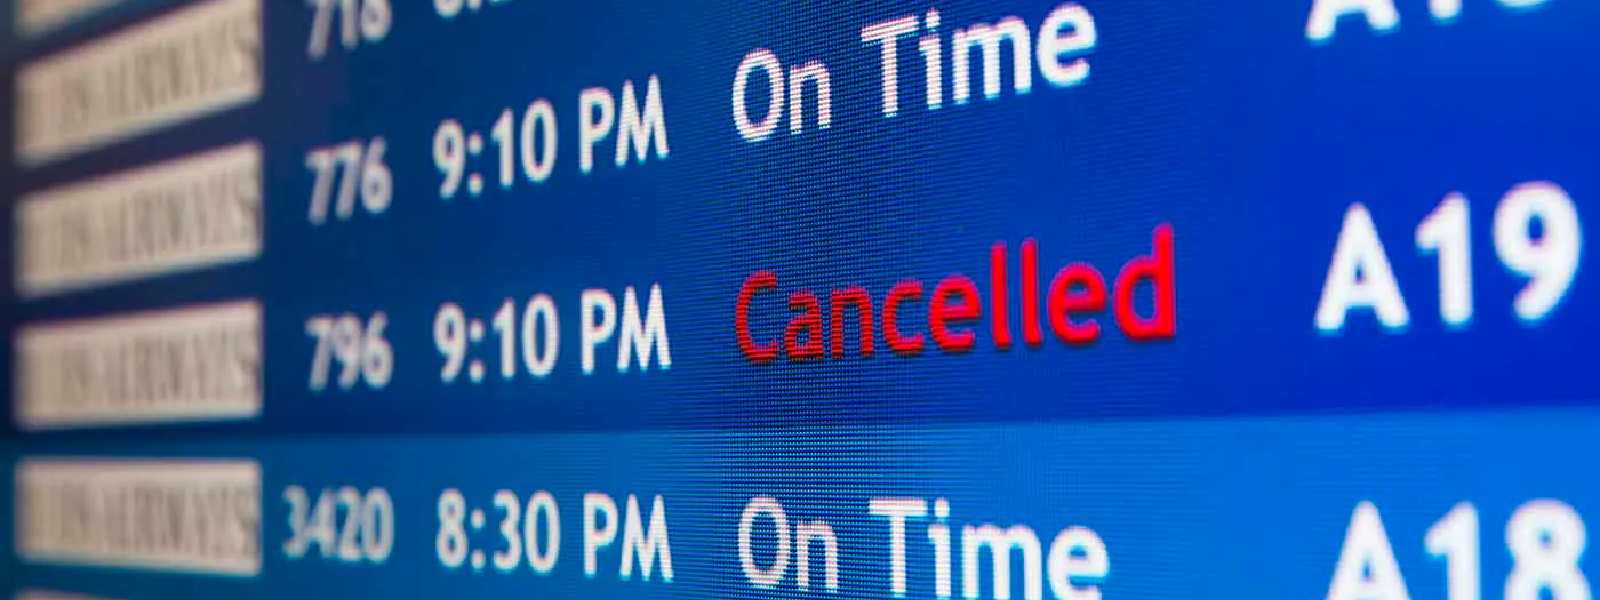 Multiple groundings at the same time led to delays, cancellations – Clarification from SriLankan